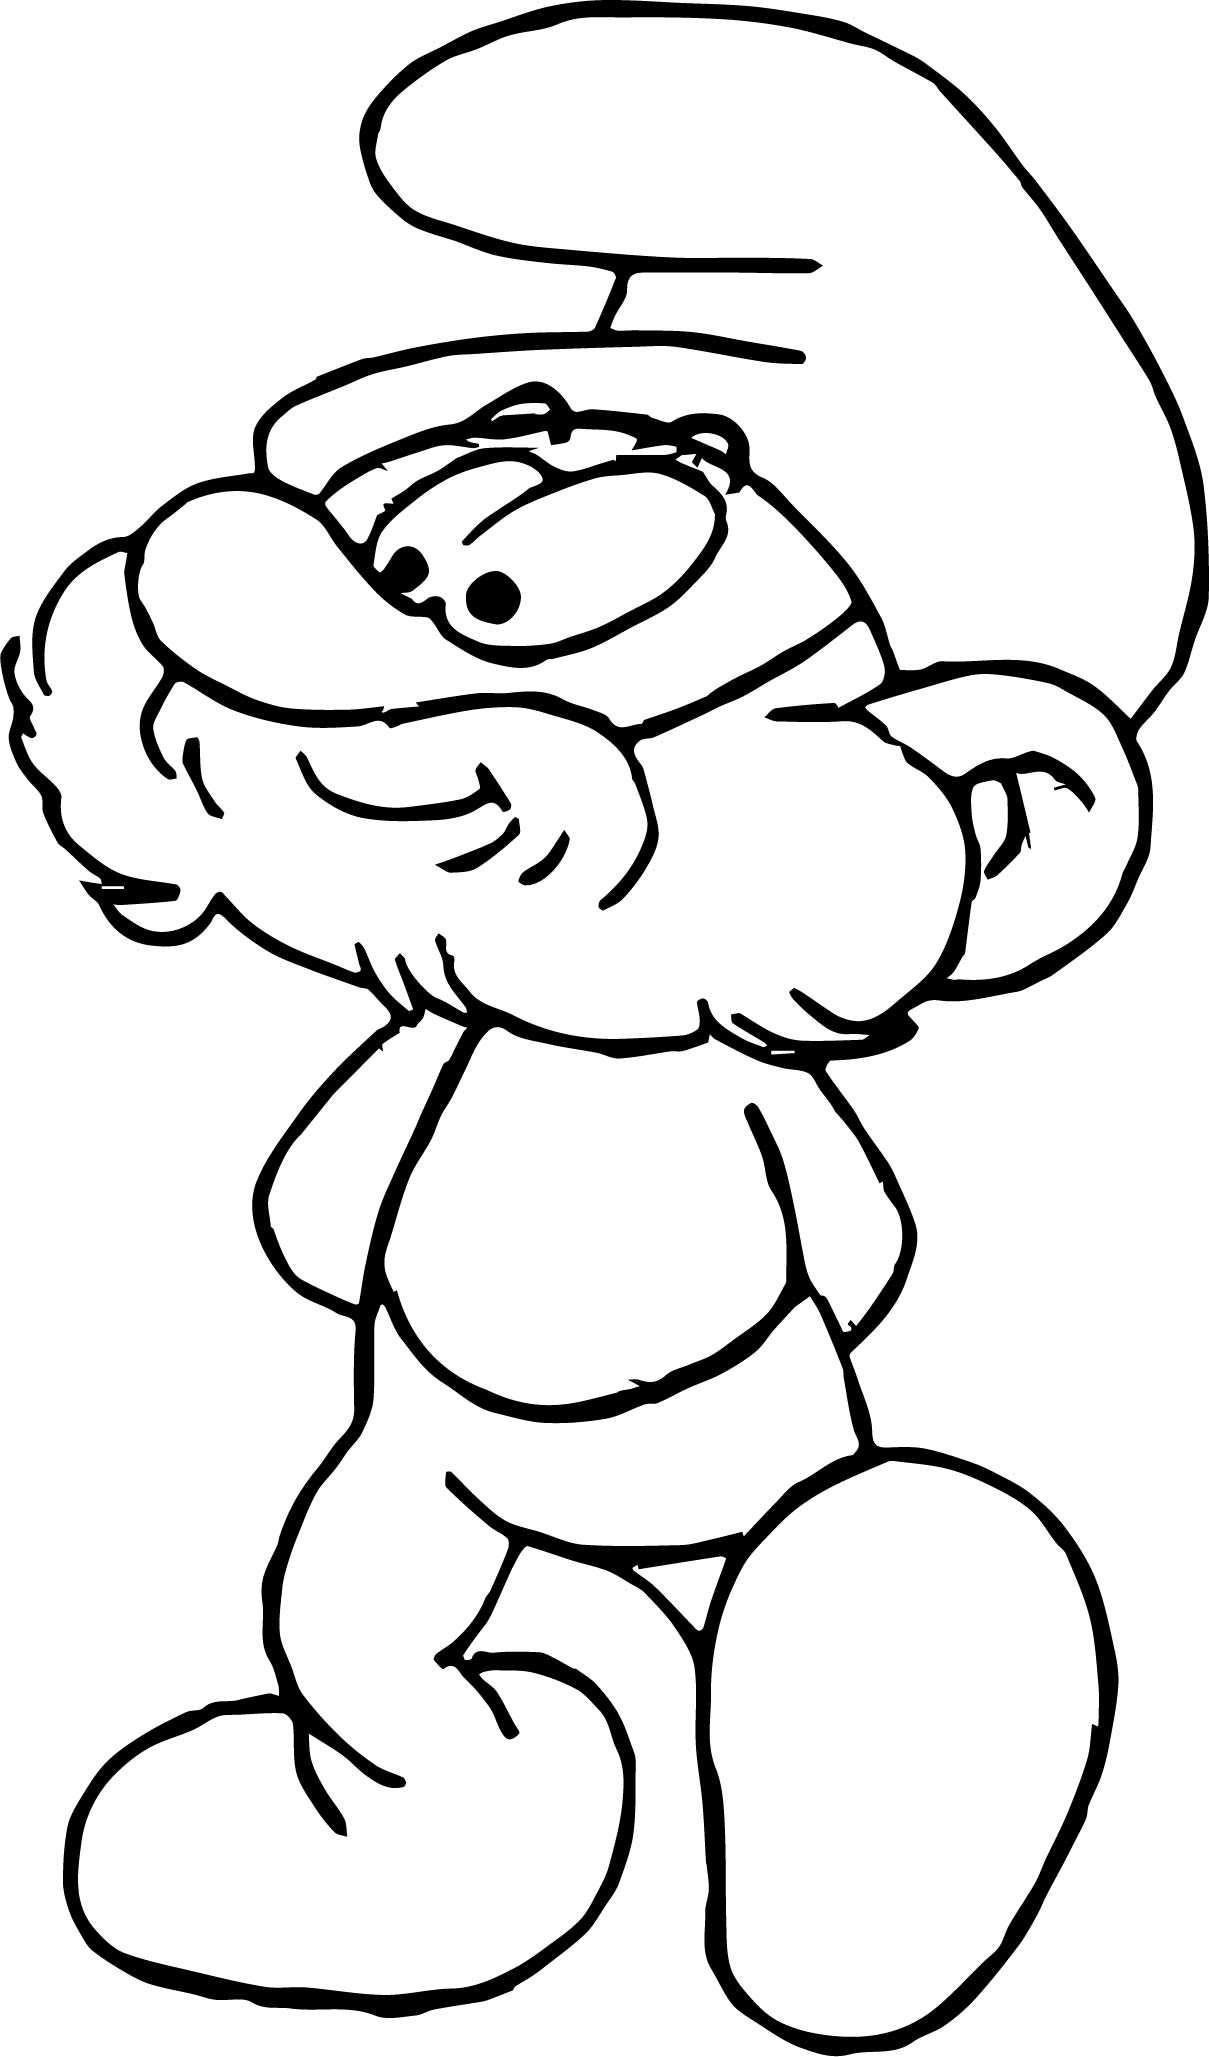 papa smurf coloring pages 19 papa smurf coloring page papa smurf pages coloring 